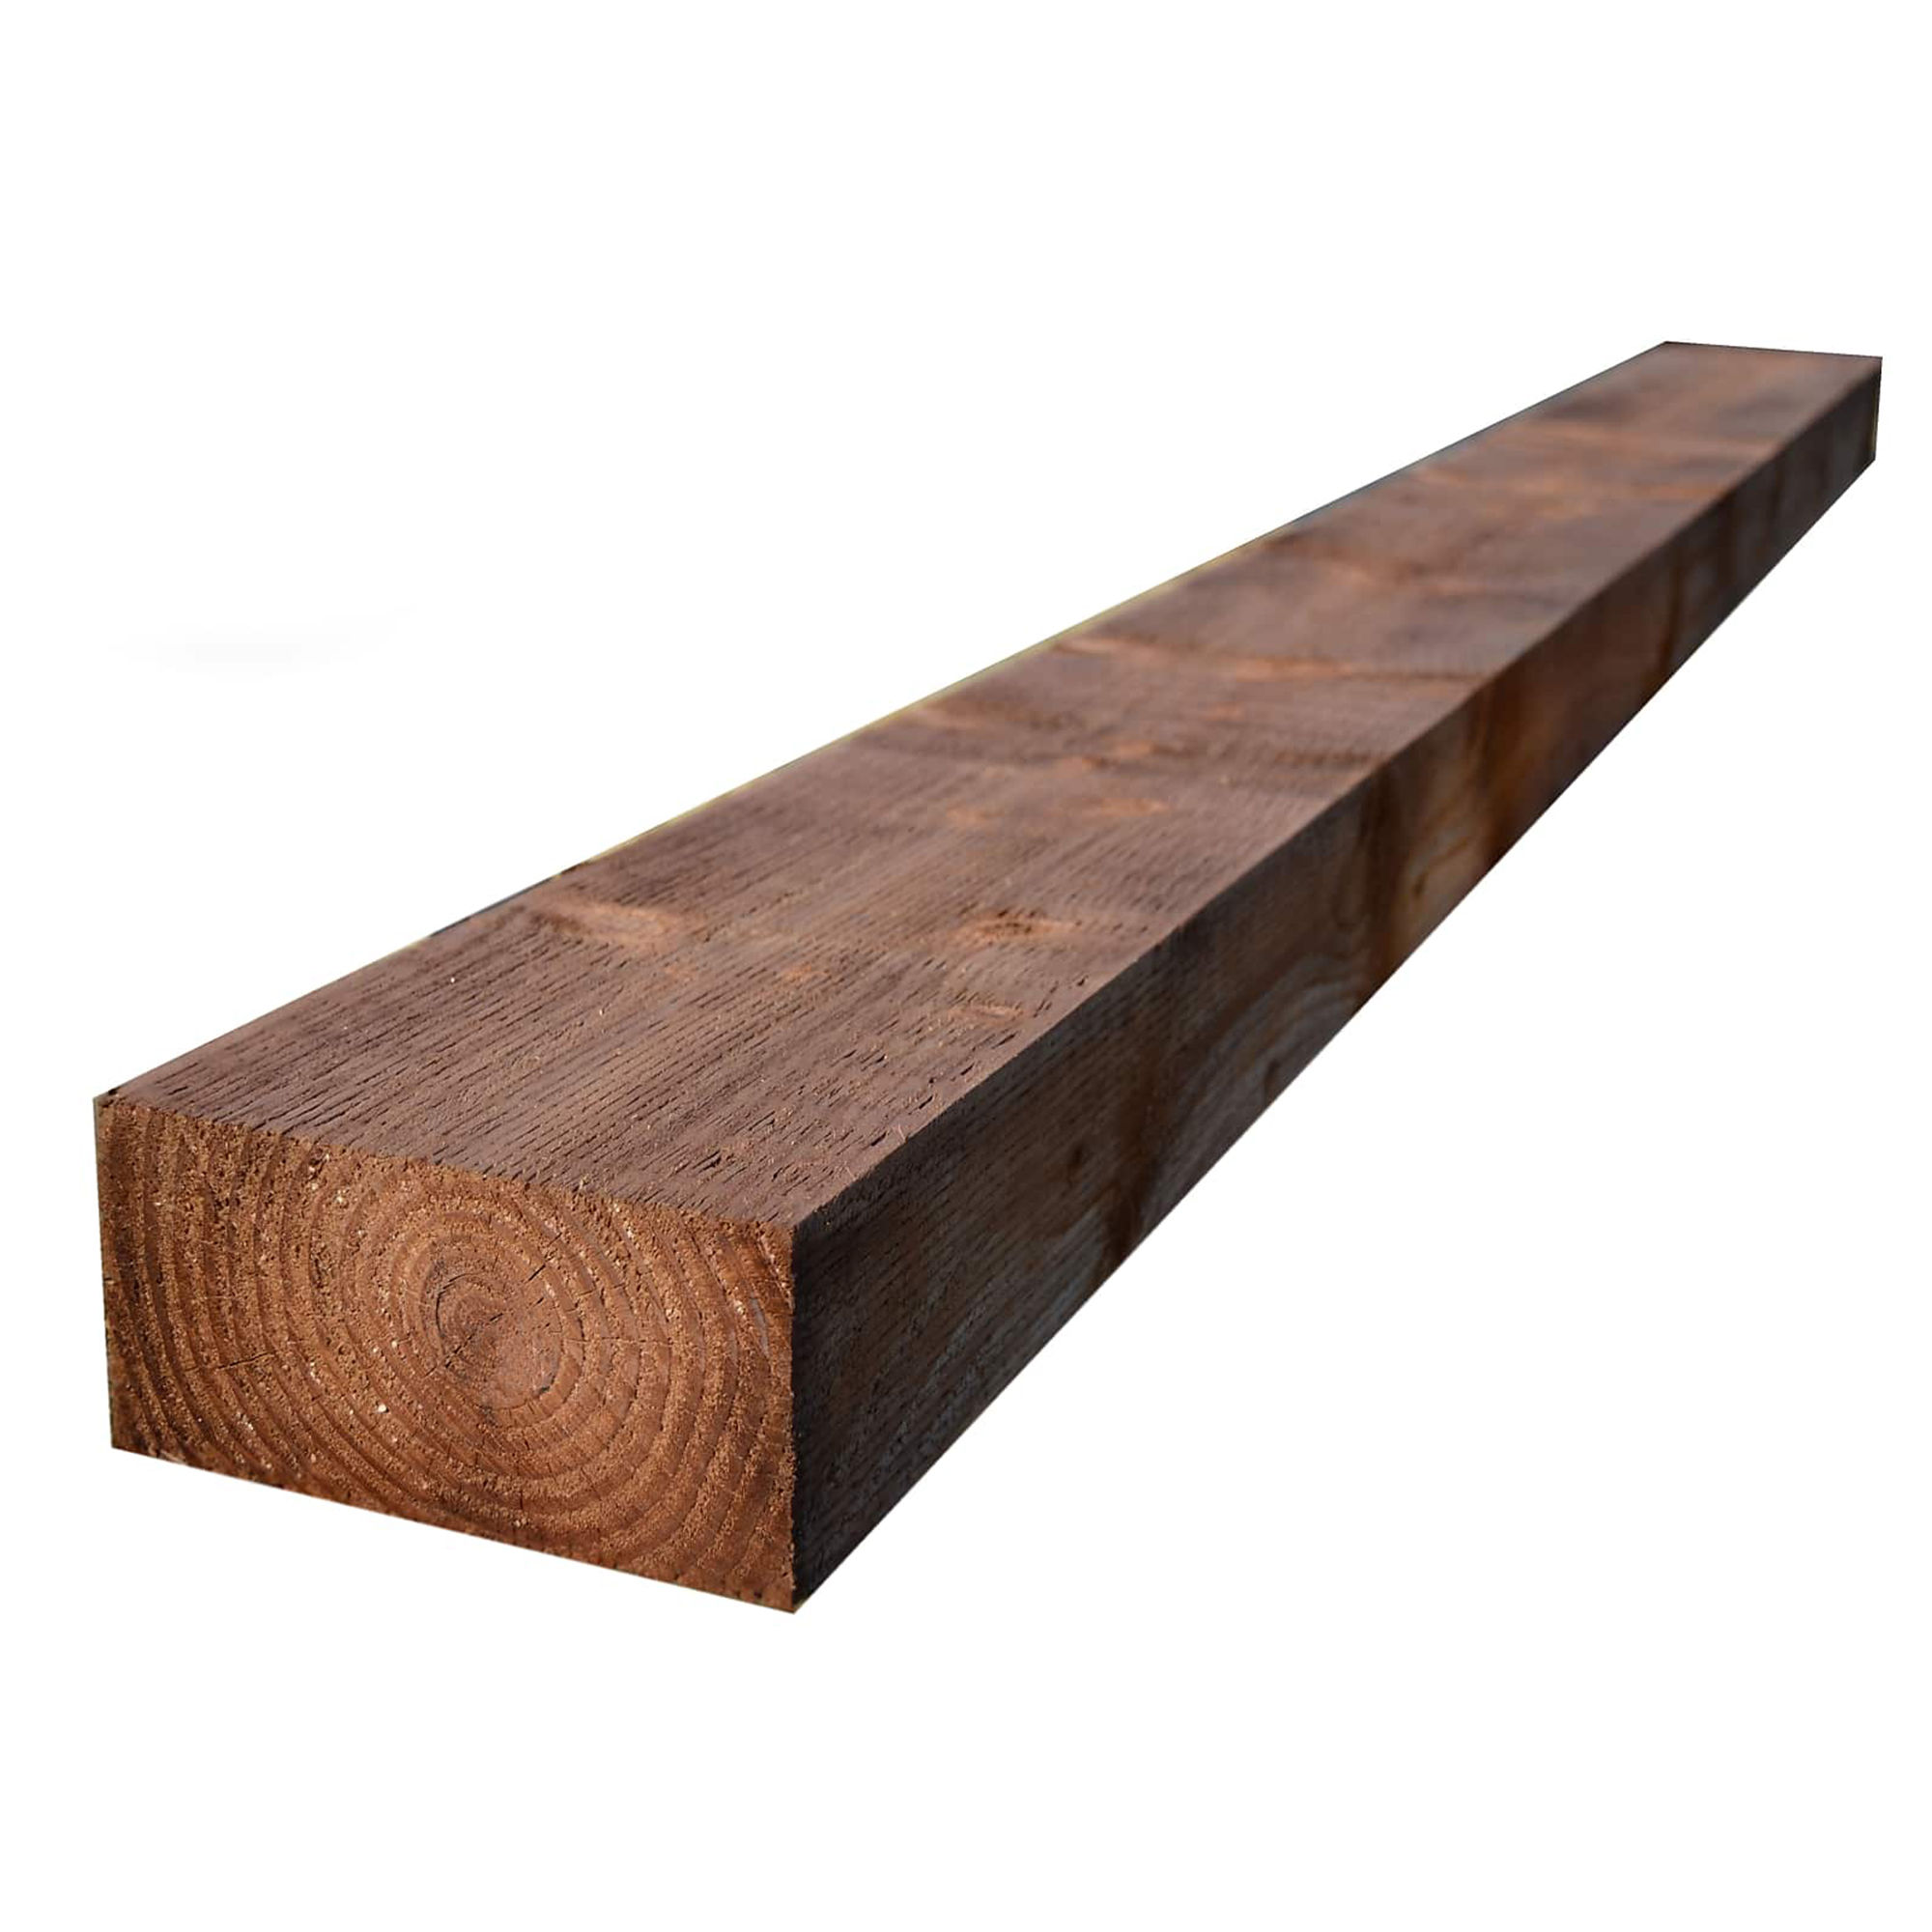 Garden Sleeper Treated European Softwood Tanatone Brown 100mm x 200mm x 2.4m (Finished Size 95mm x 195mm)